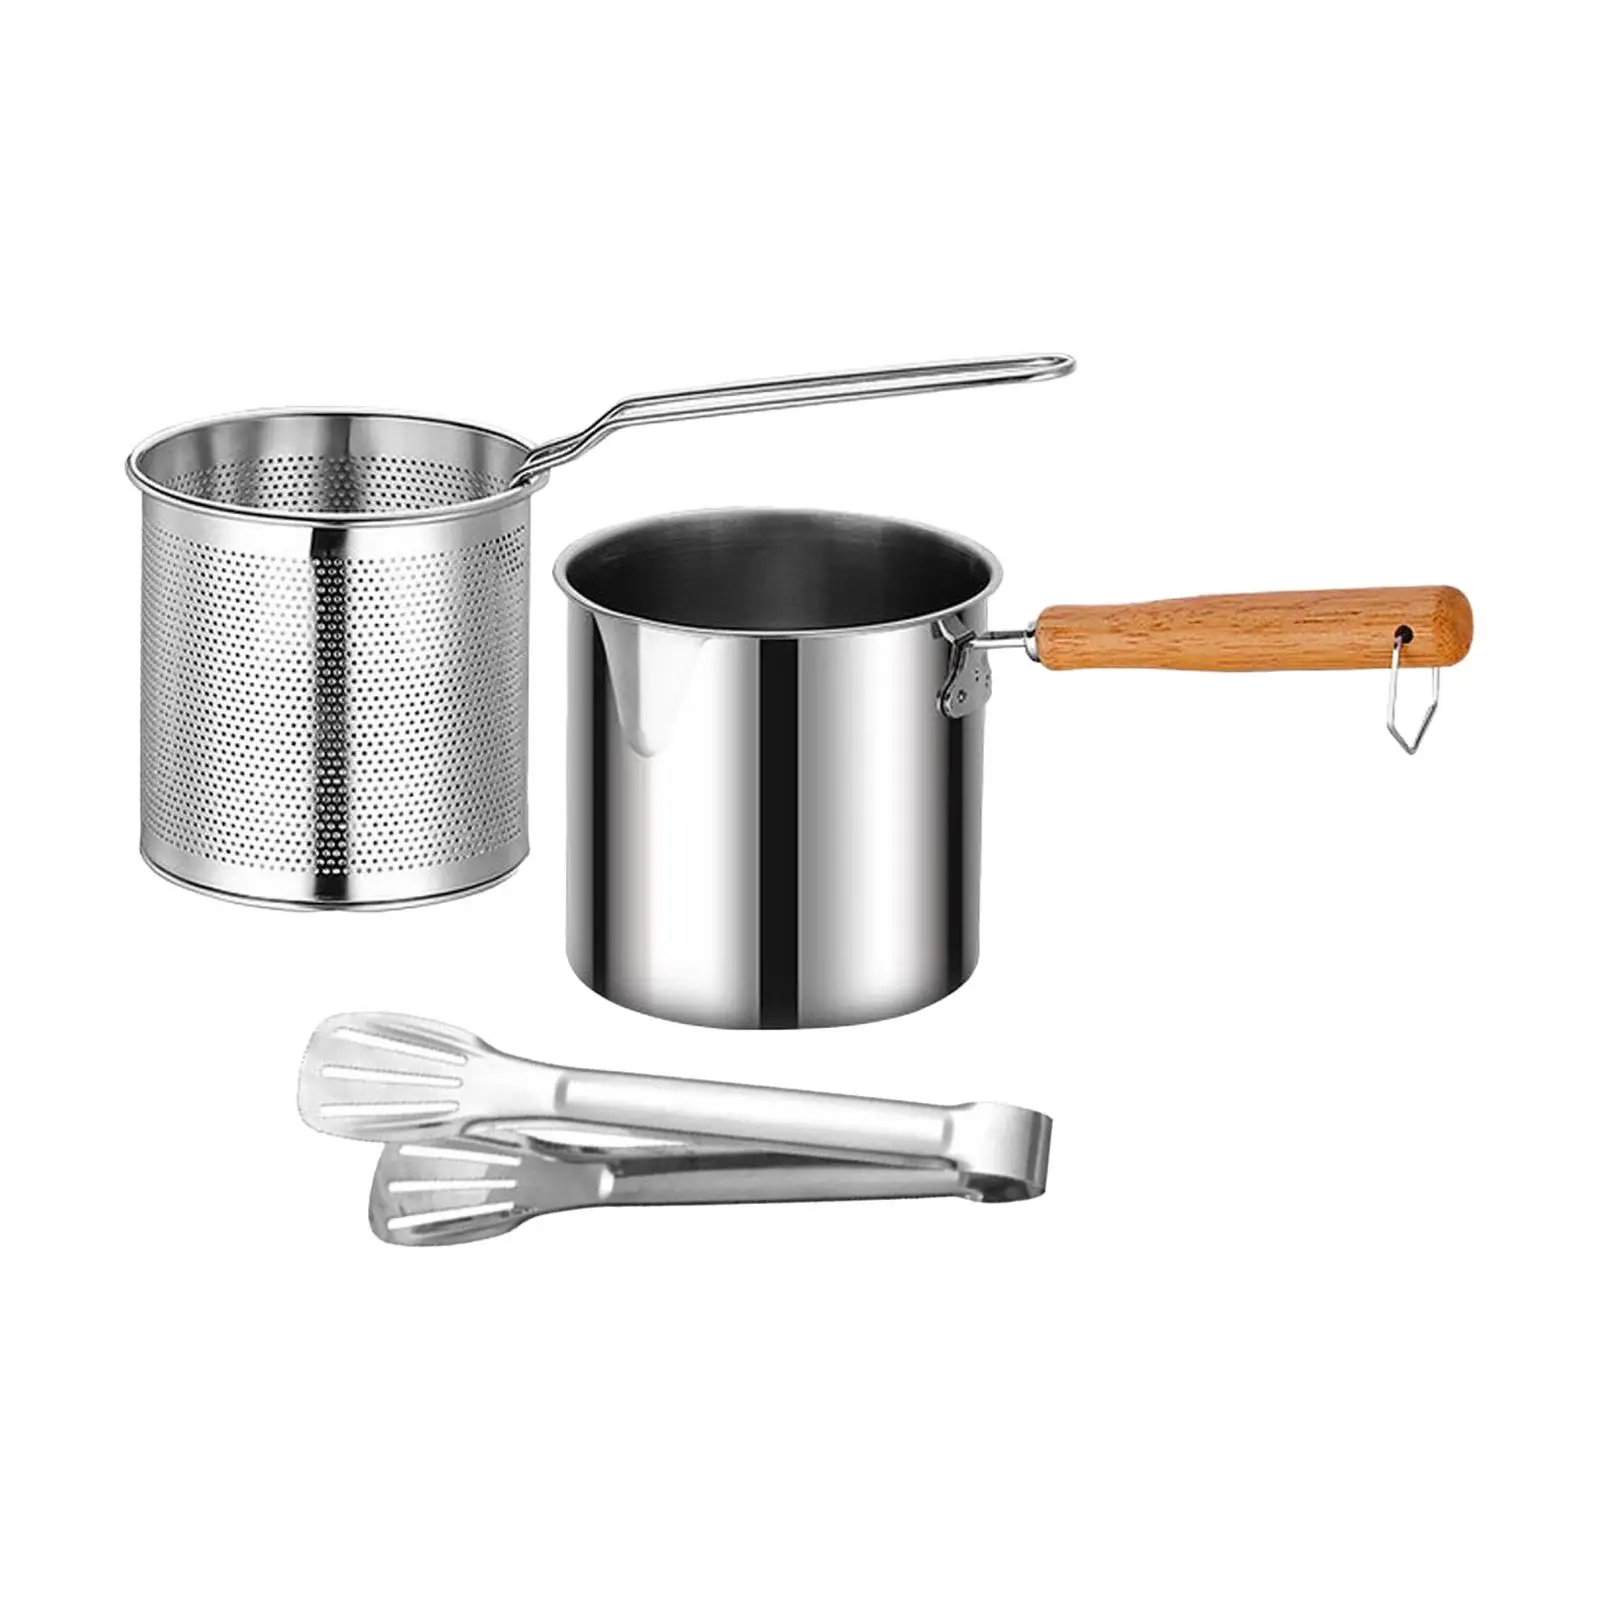 Deep Frying Pot with Lids Deep Fryers Frying Pot Kitchen Cooking Tools Frying Basket Pasta Basket for Home Outdoor Camping